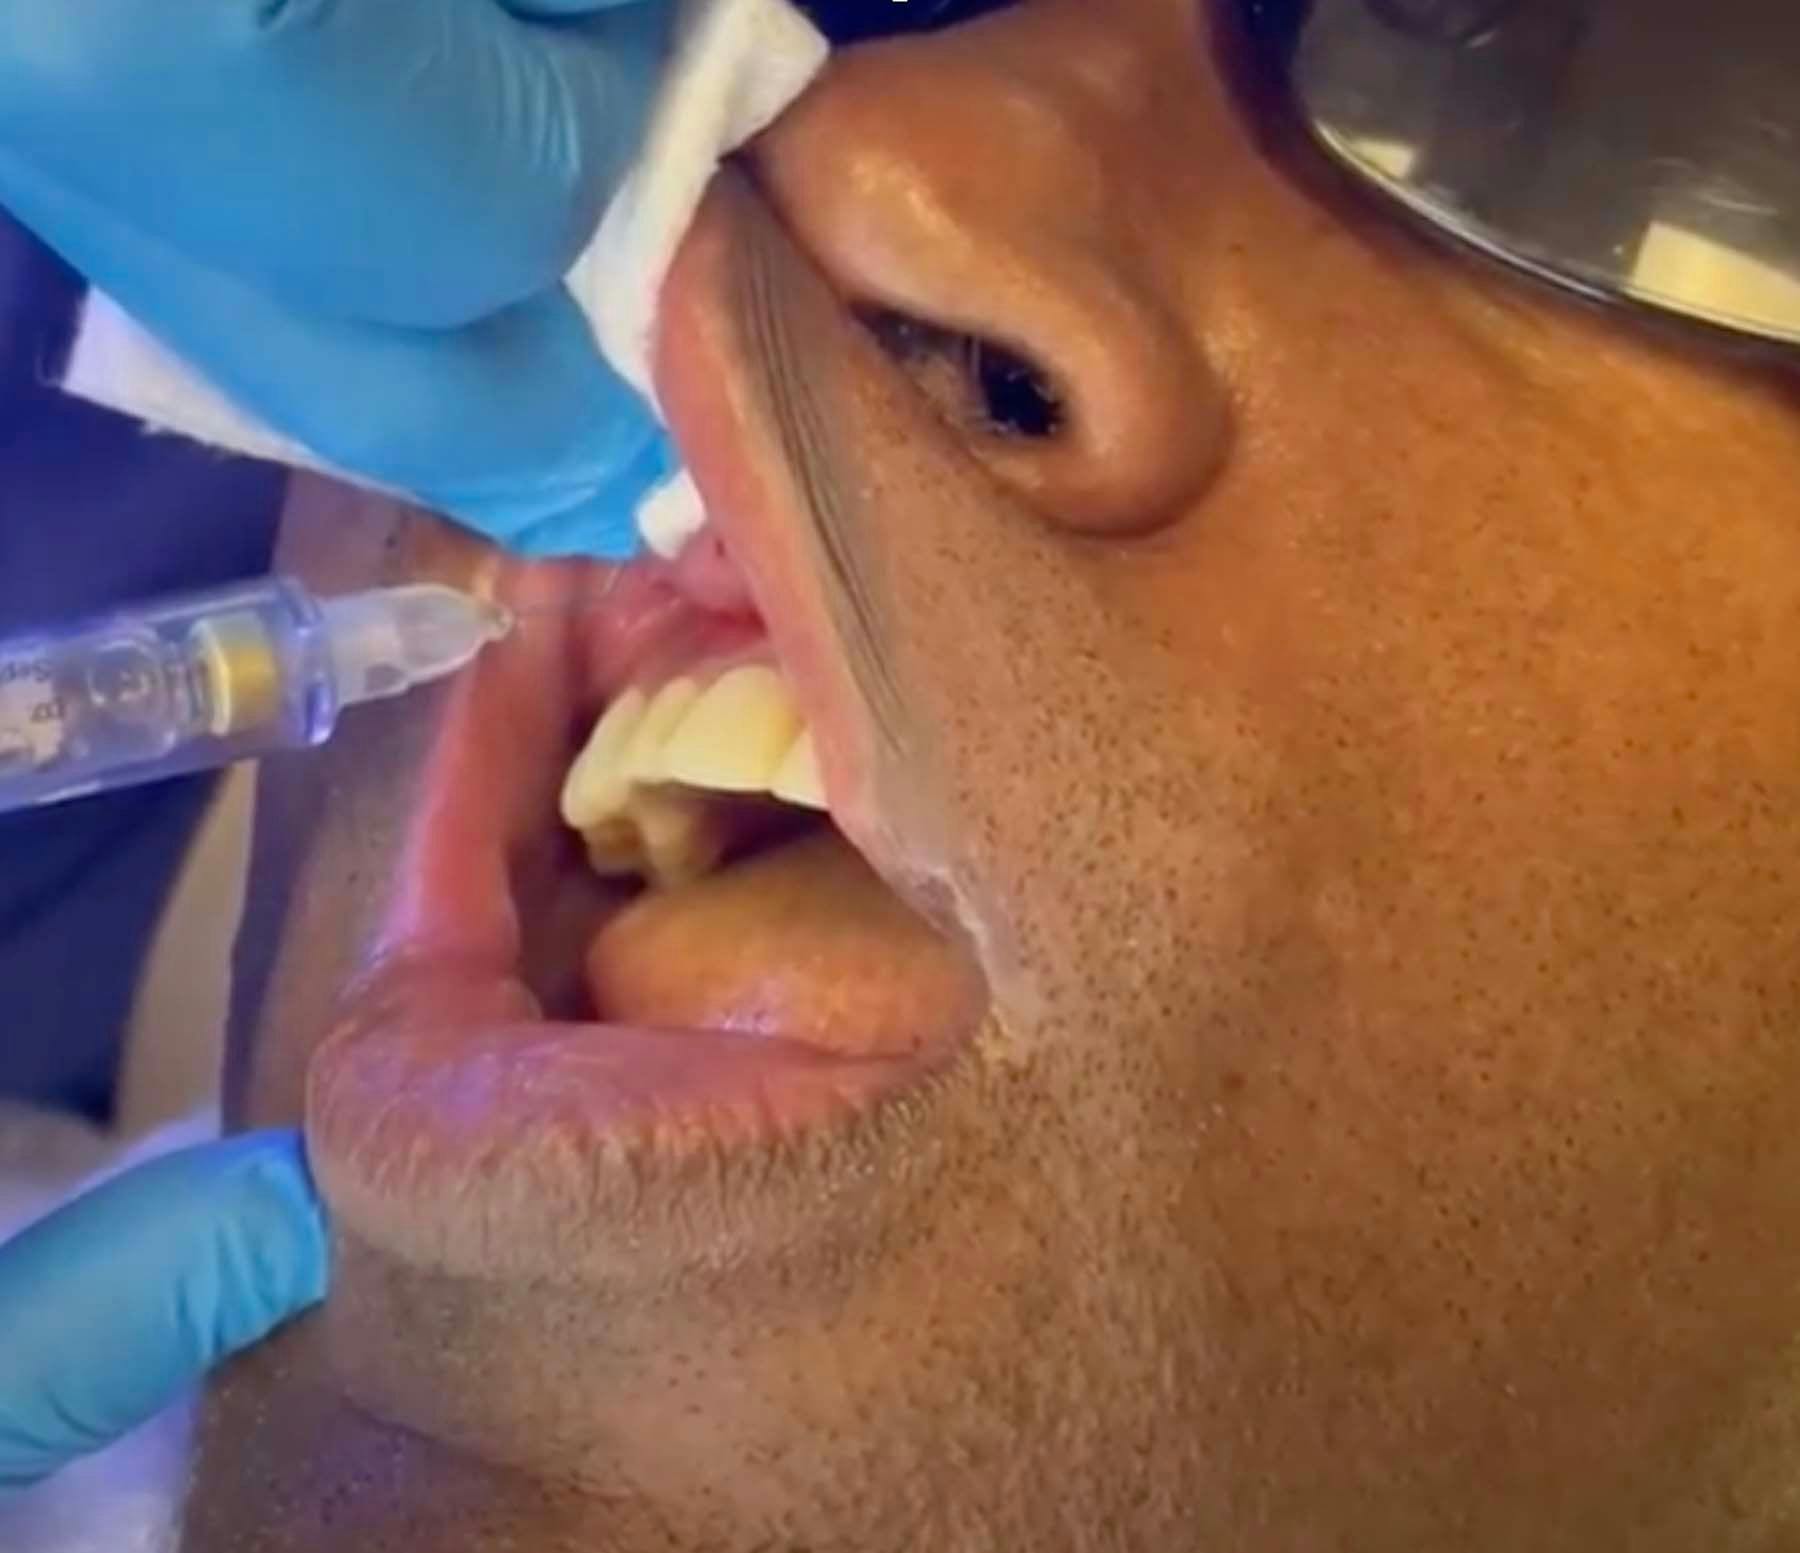 Figure 1. Labial vestibular injections just under the nostrils are often the most painful injections. With nearly 100% consistency, the Calaject computerized anesthetic technique resulted in zero pain for this otherwise stressful and uncomfortable procedure.